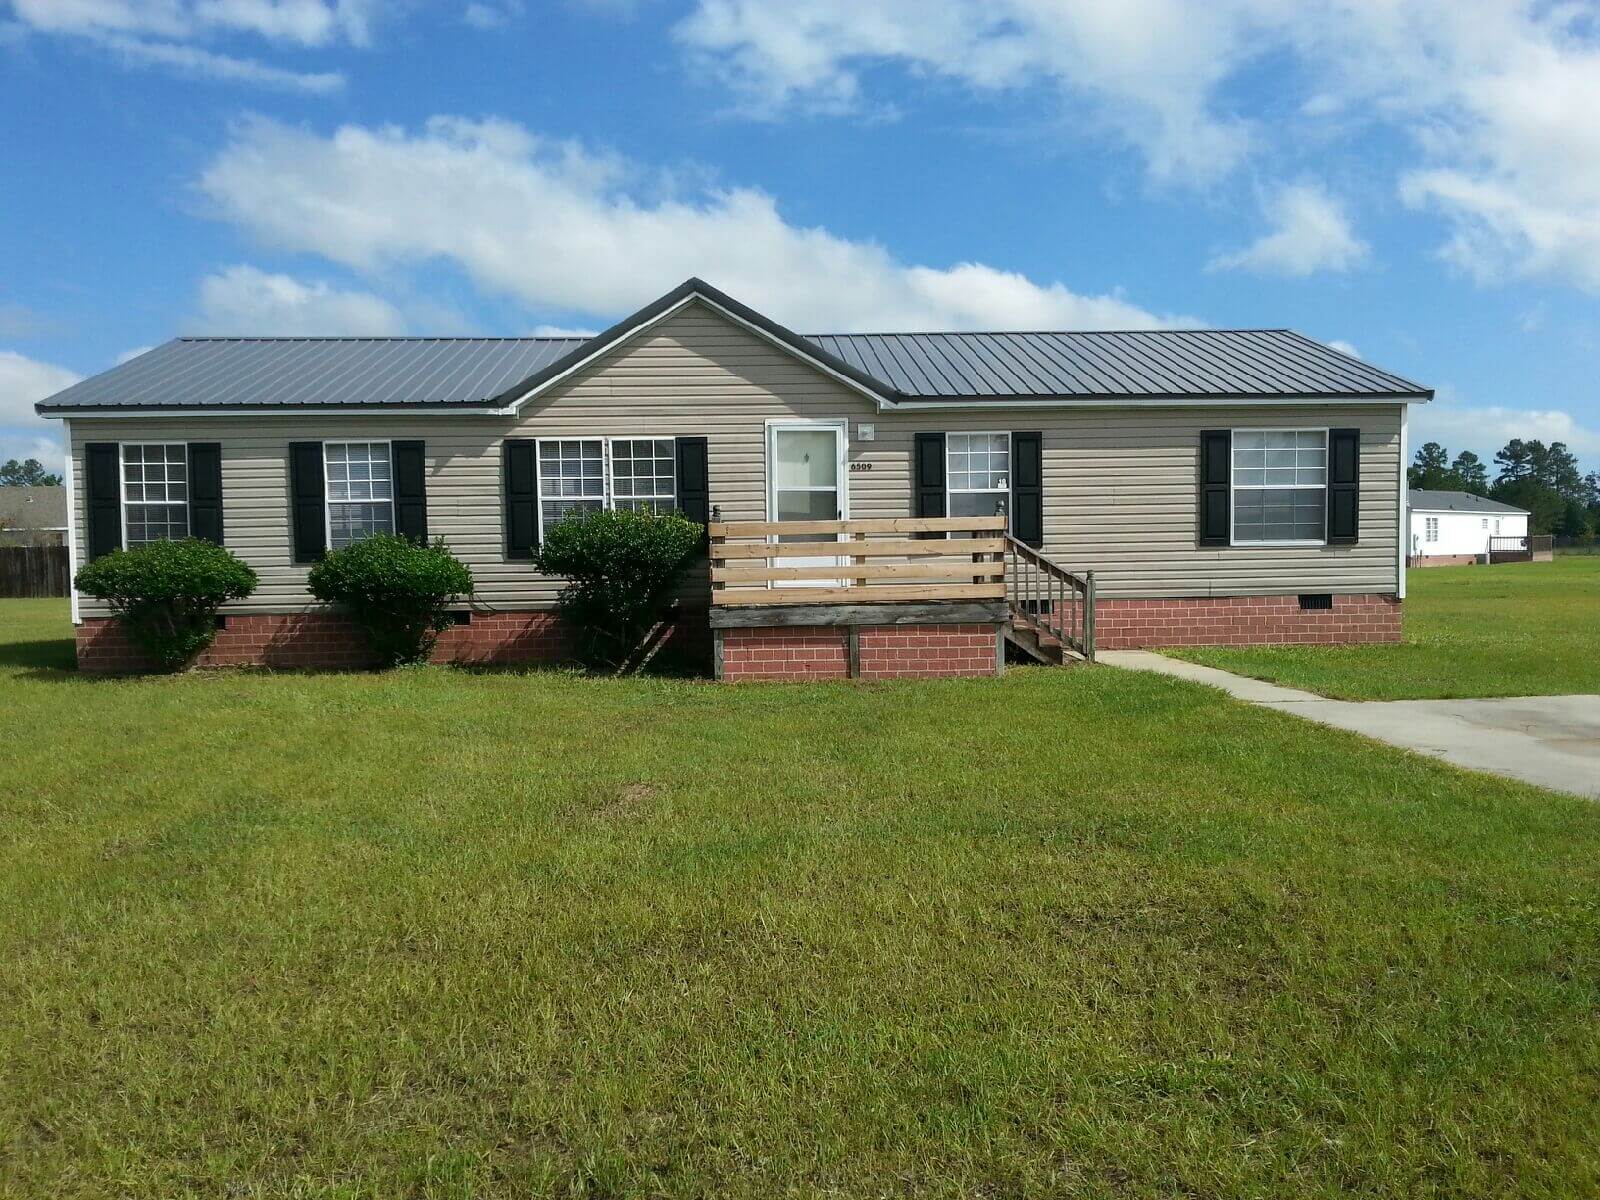 3 br 2 ba Mobile Home For Rent $750/mo - Homes for Rent | Homes for